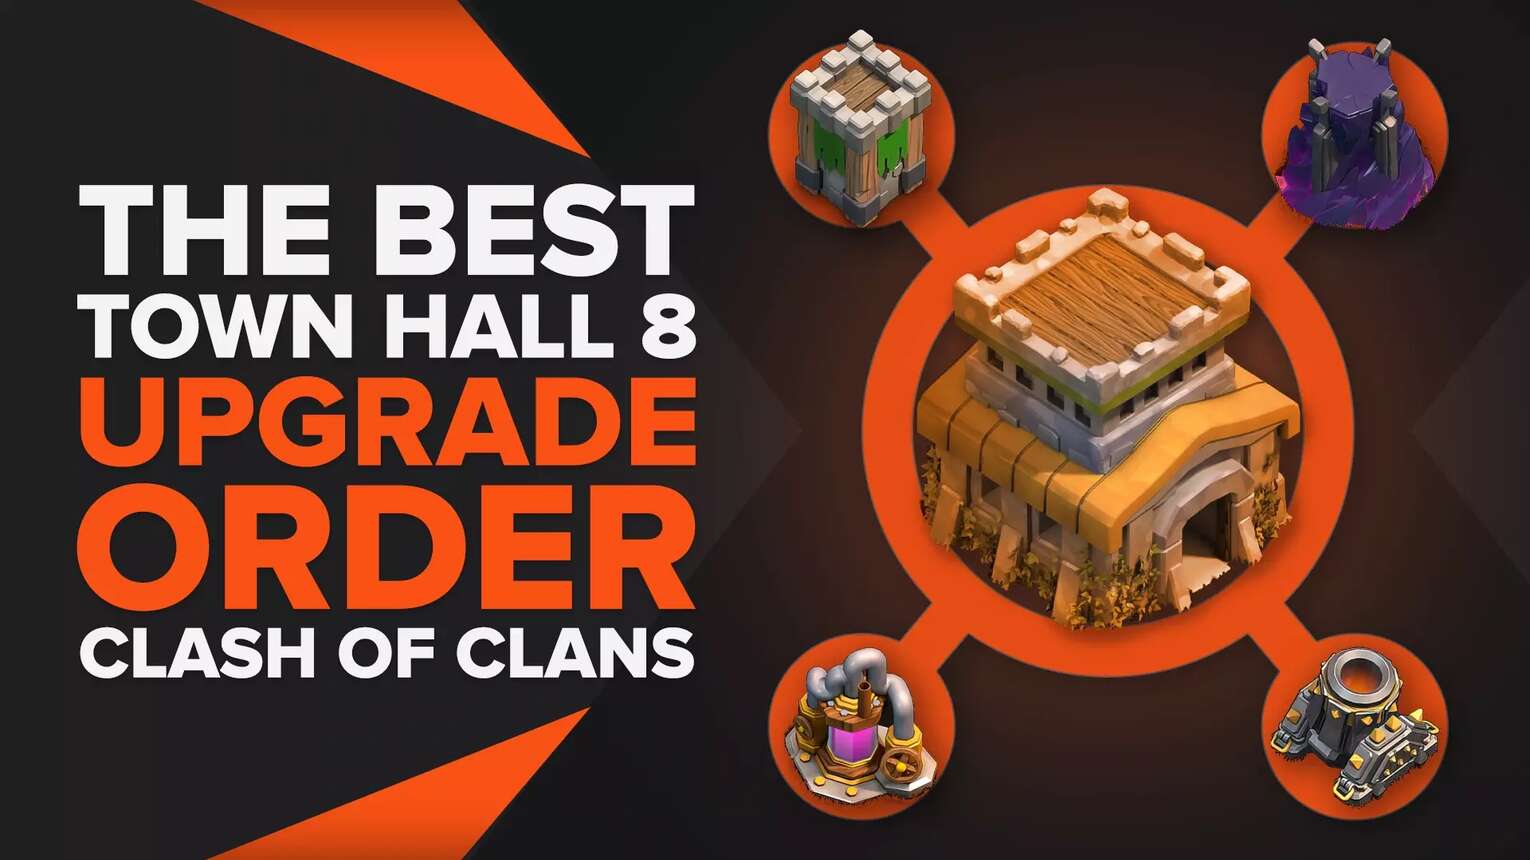 See The Best Town Hall 8 Upgrade Order in Clash of Clans!